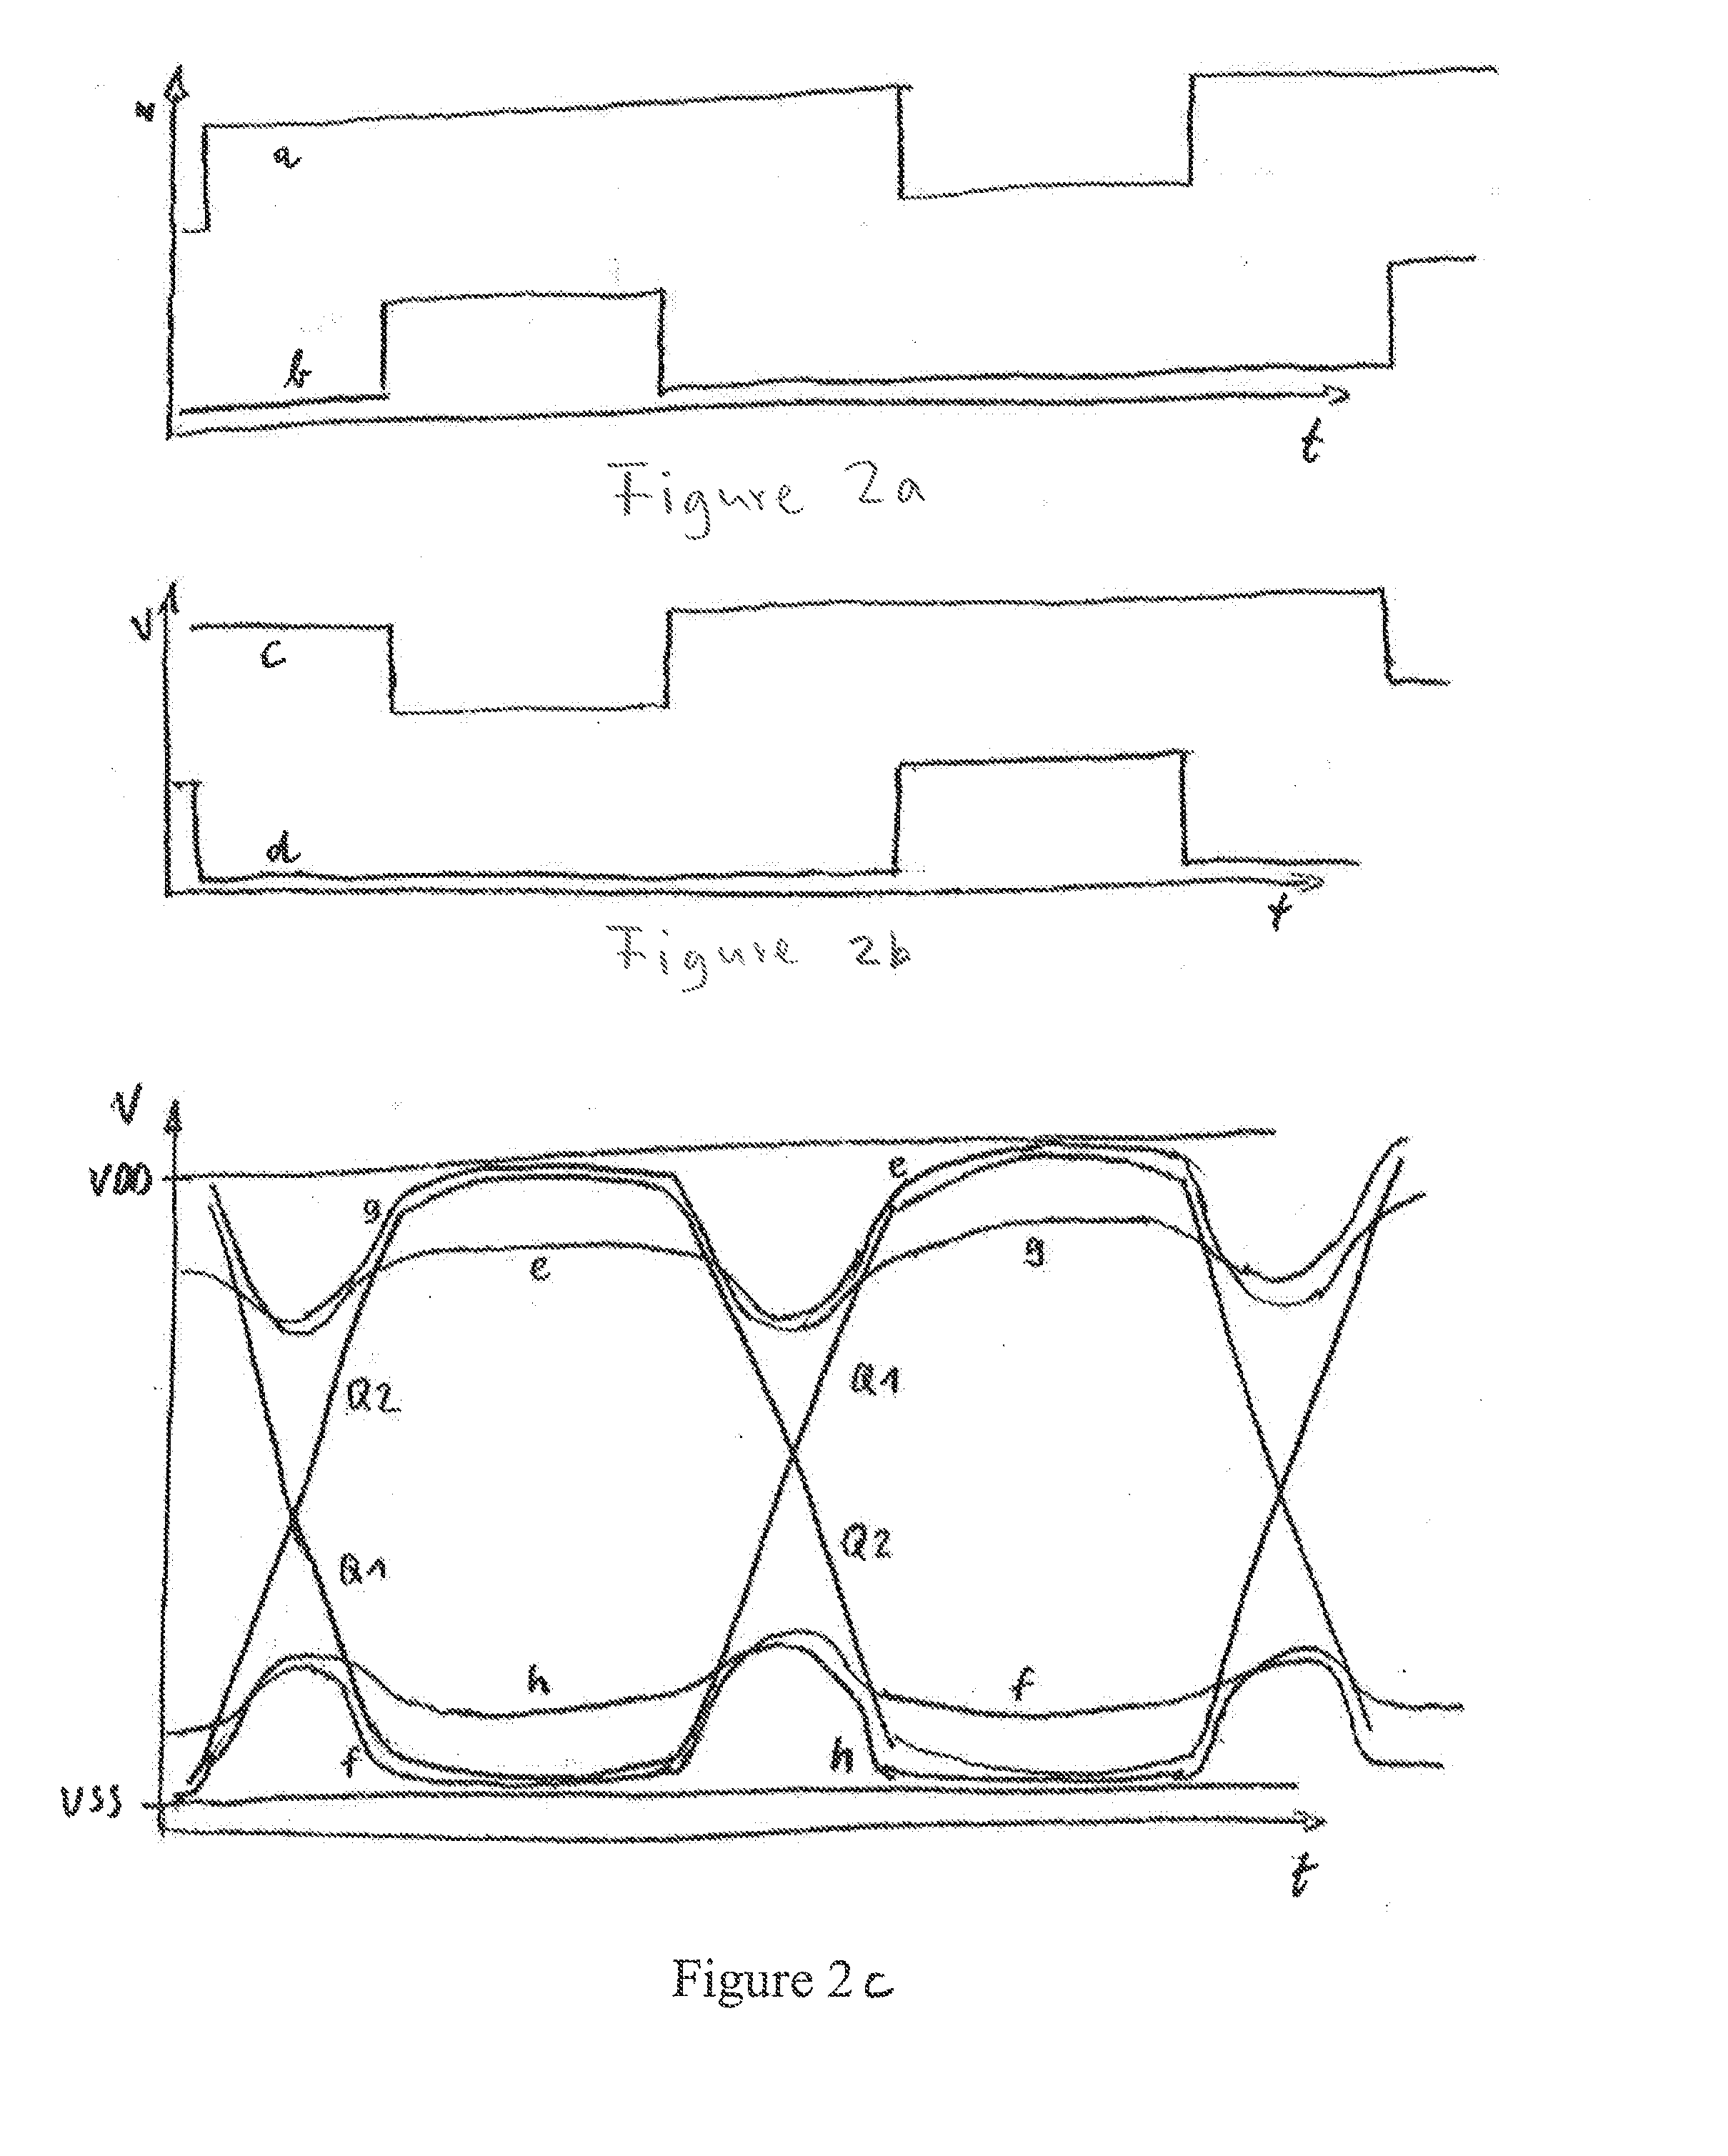 Methods and Systems for Converting a DC-Voltage to an AC-Voltage